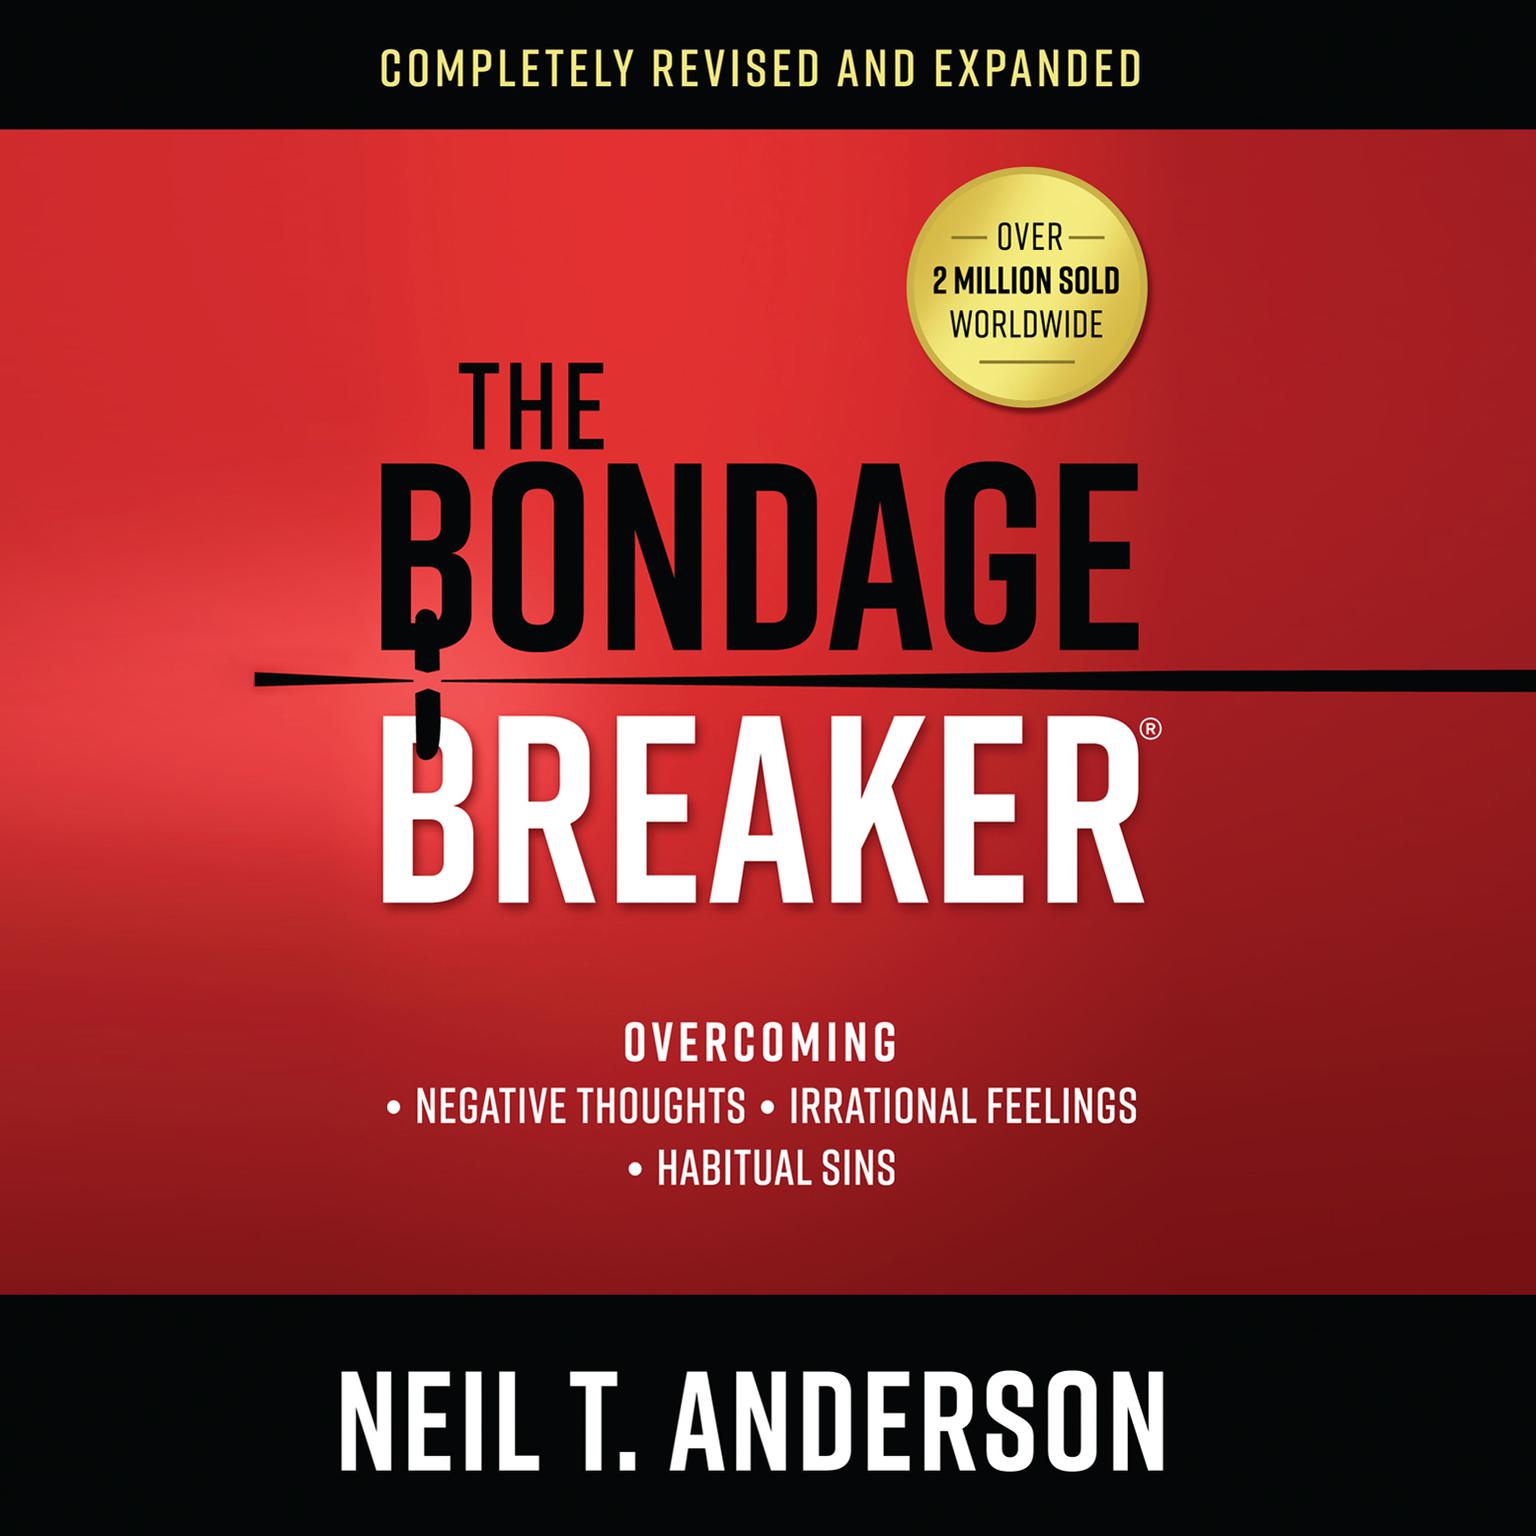 The Bondage Breaker: Overcoming Negative Thoughts, Irrational Feelings, Habitual Sins Audiobook, by Neil T. Anderson